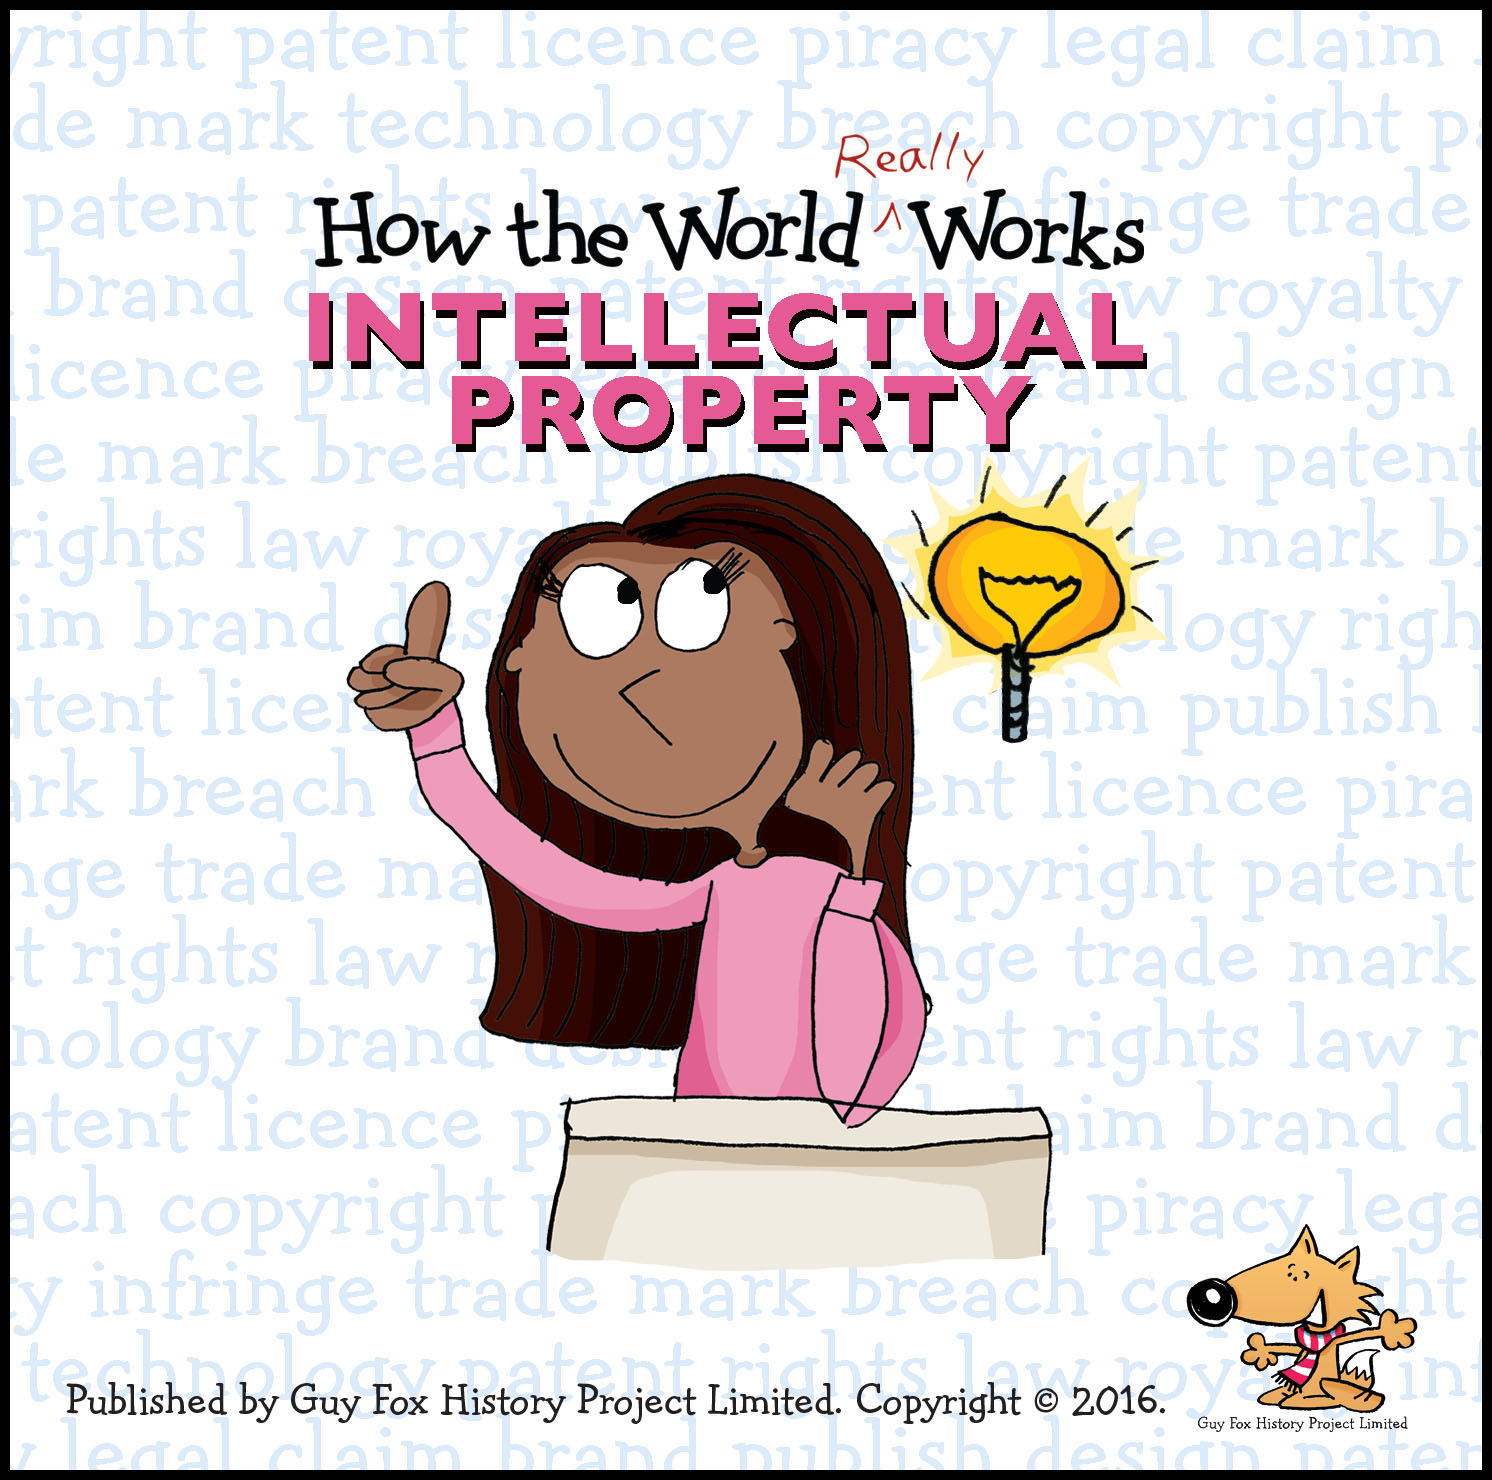 Link to How the World REALLY Works: Intellectual property